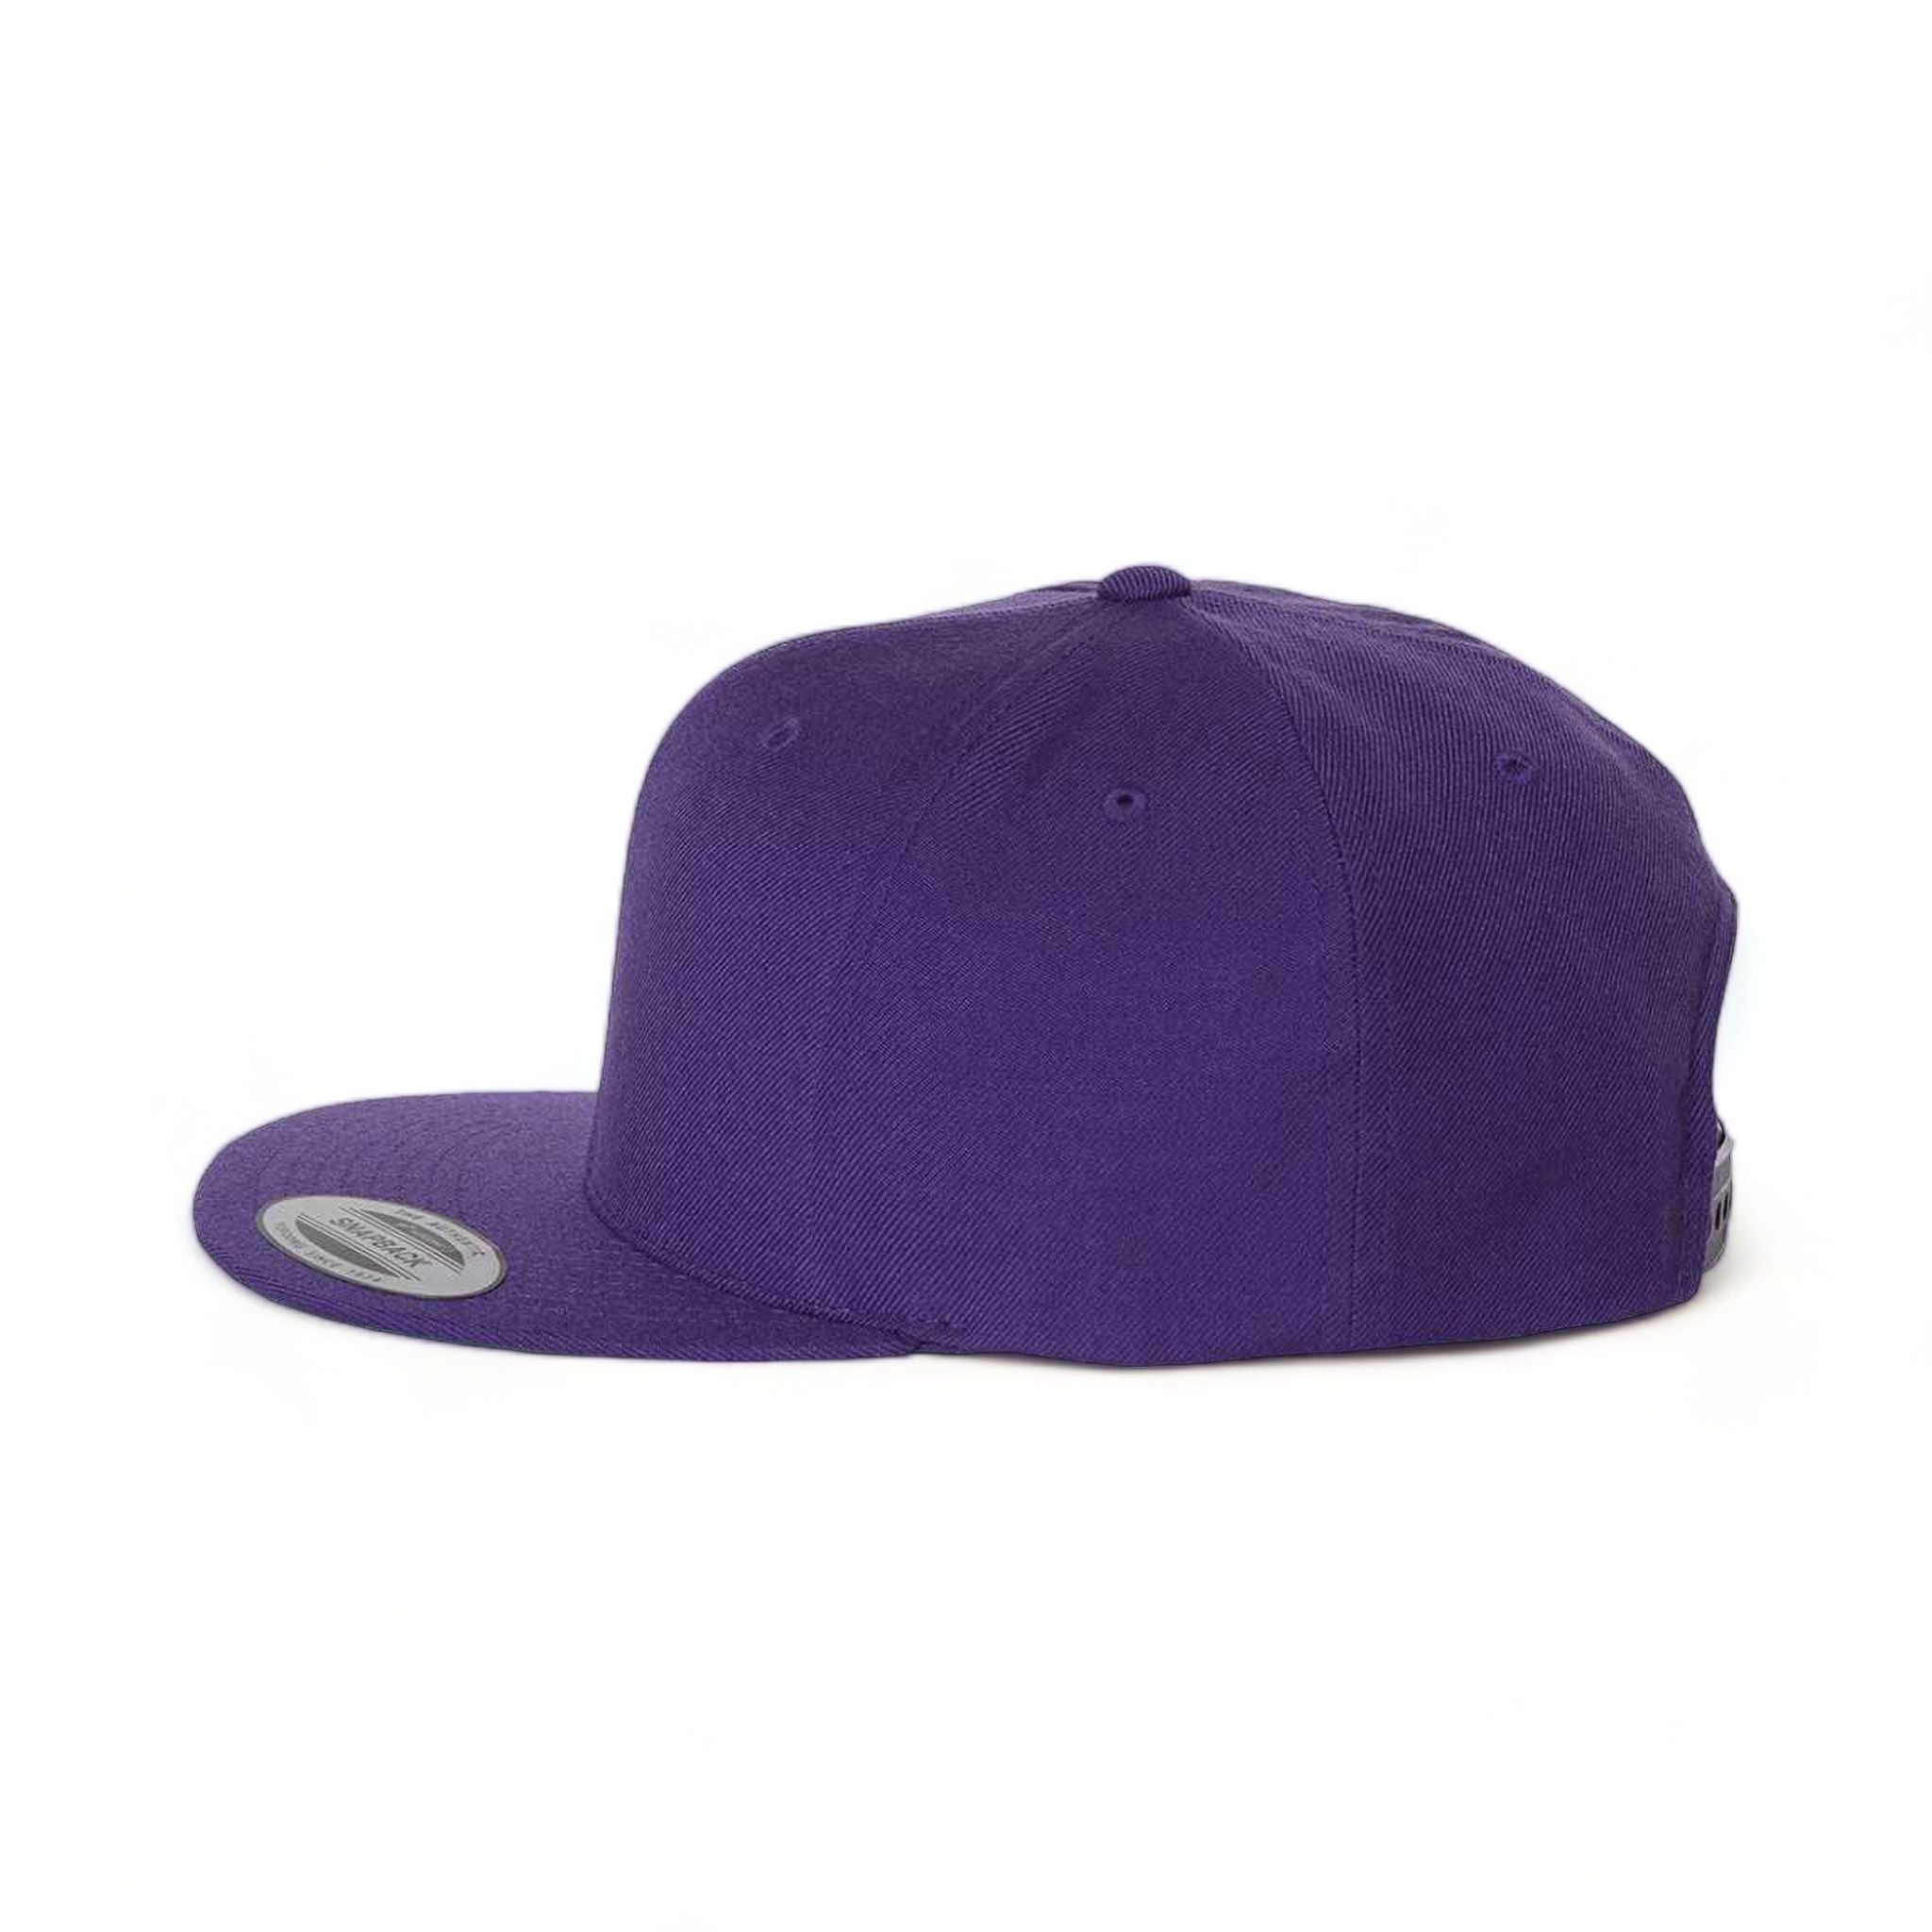 Side view of YP Classics 6089M custom hat in purple